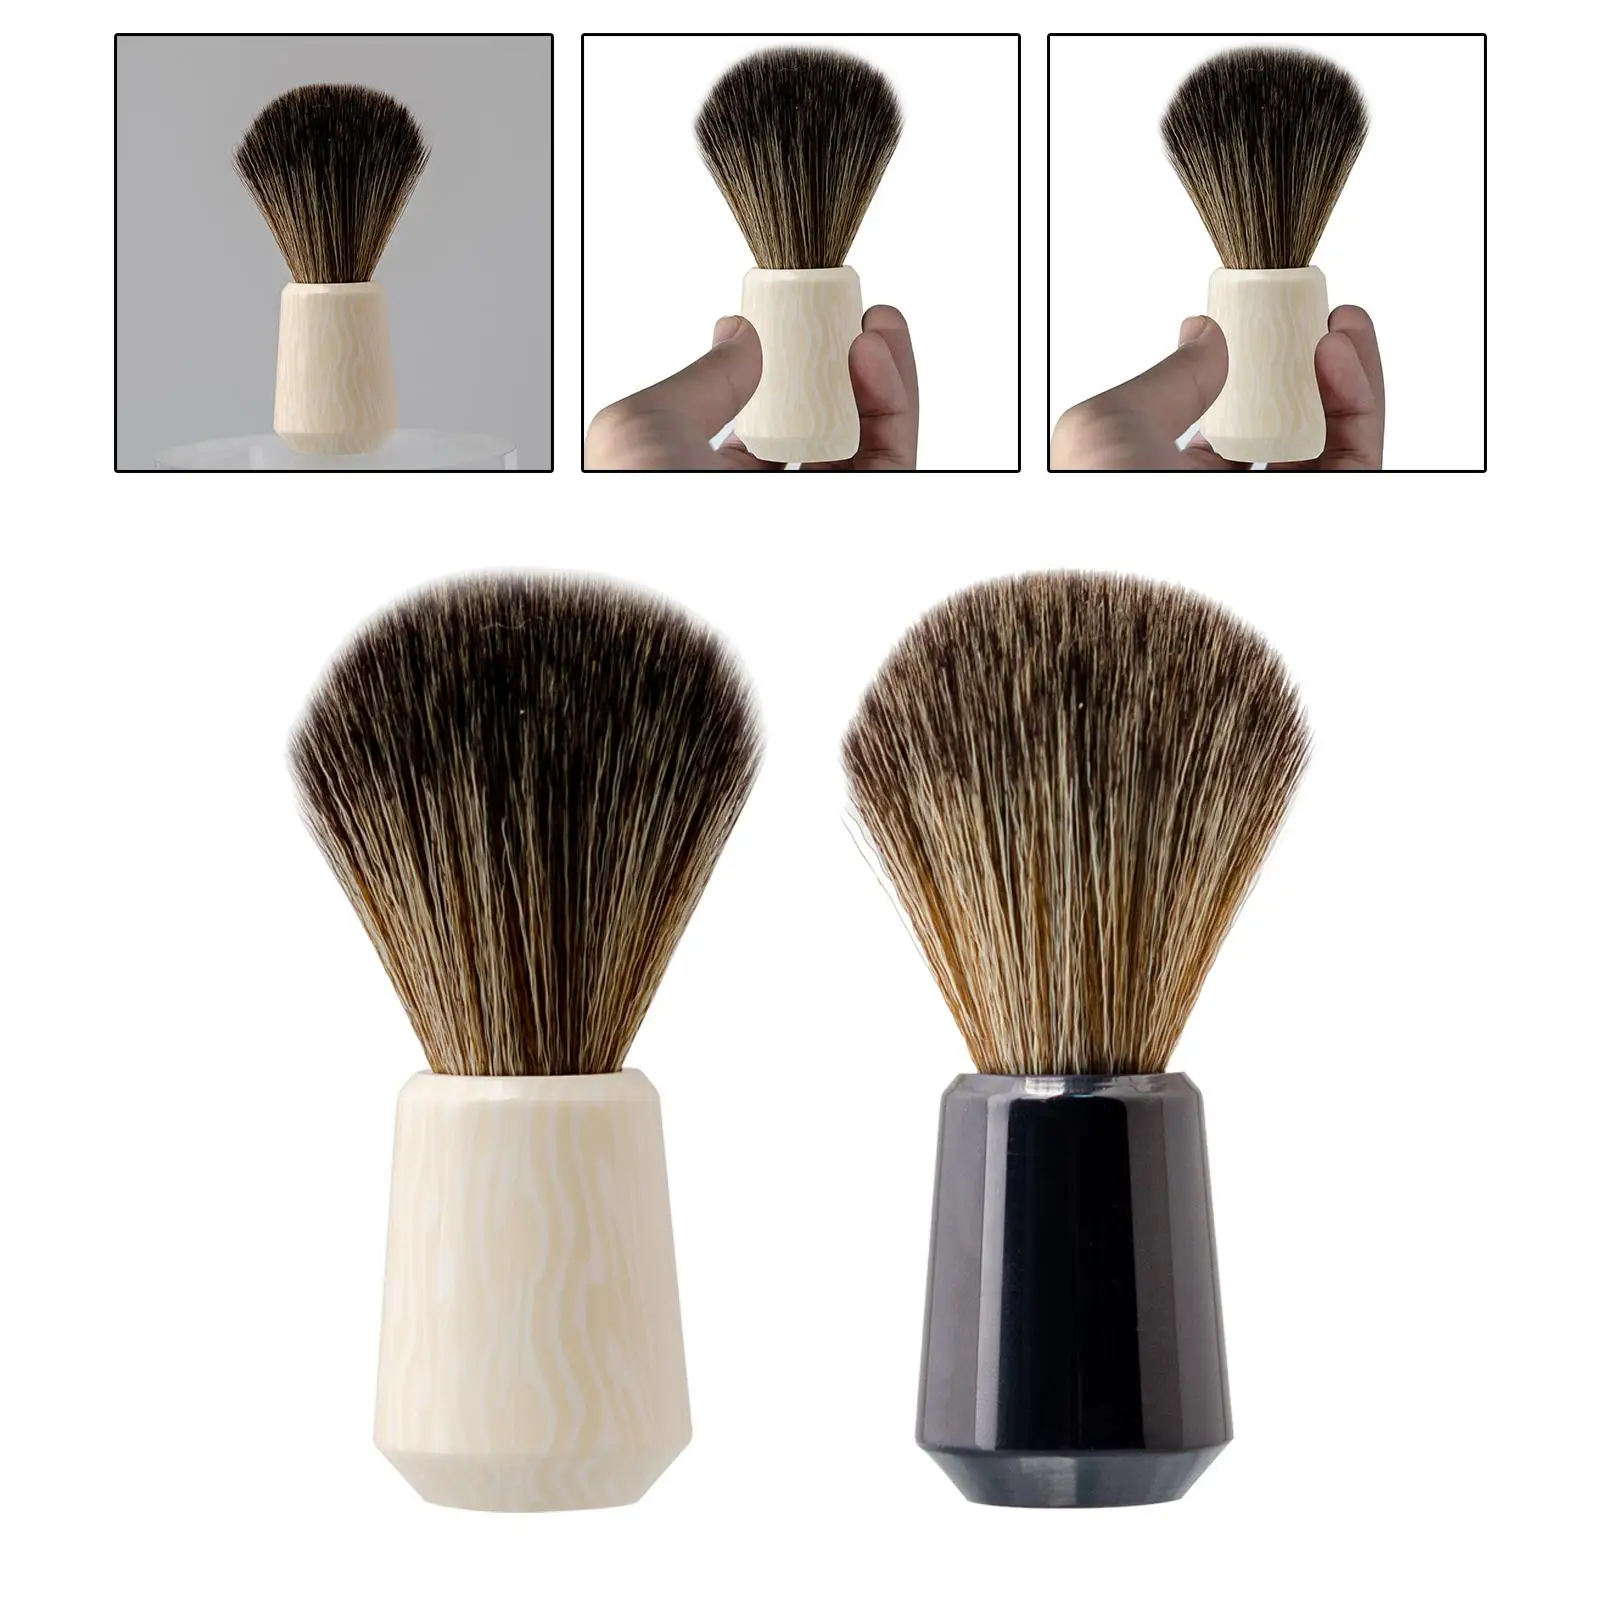 Shaving Brush Easy Foaming Accessories Father Day Gifts Lightweight Resin Handle Nylon Bristles for Barbershop Salon Home Travel